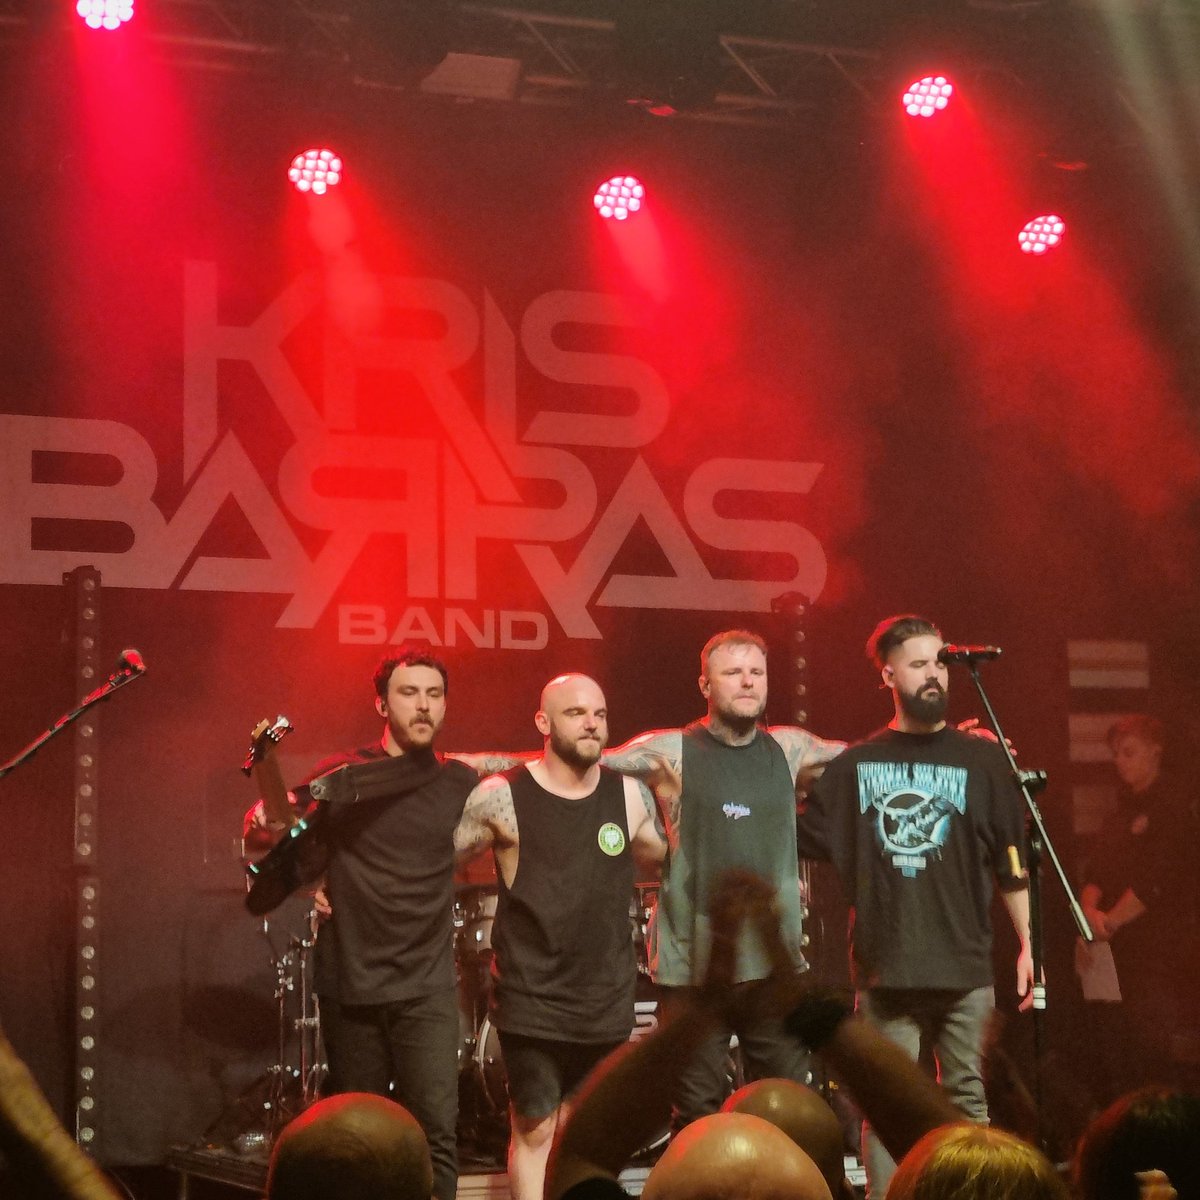 @KrisBarrasBand at the end of their phenomenal set at Manchester Academy Sunday 14th April. #keepmusiclive